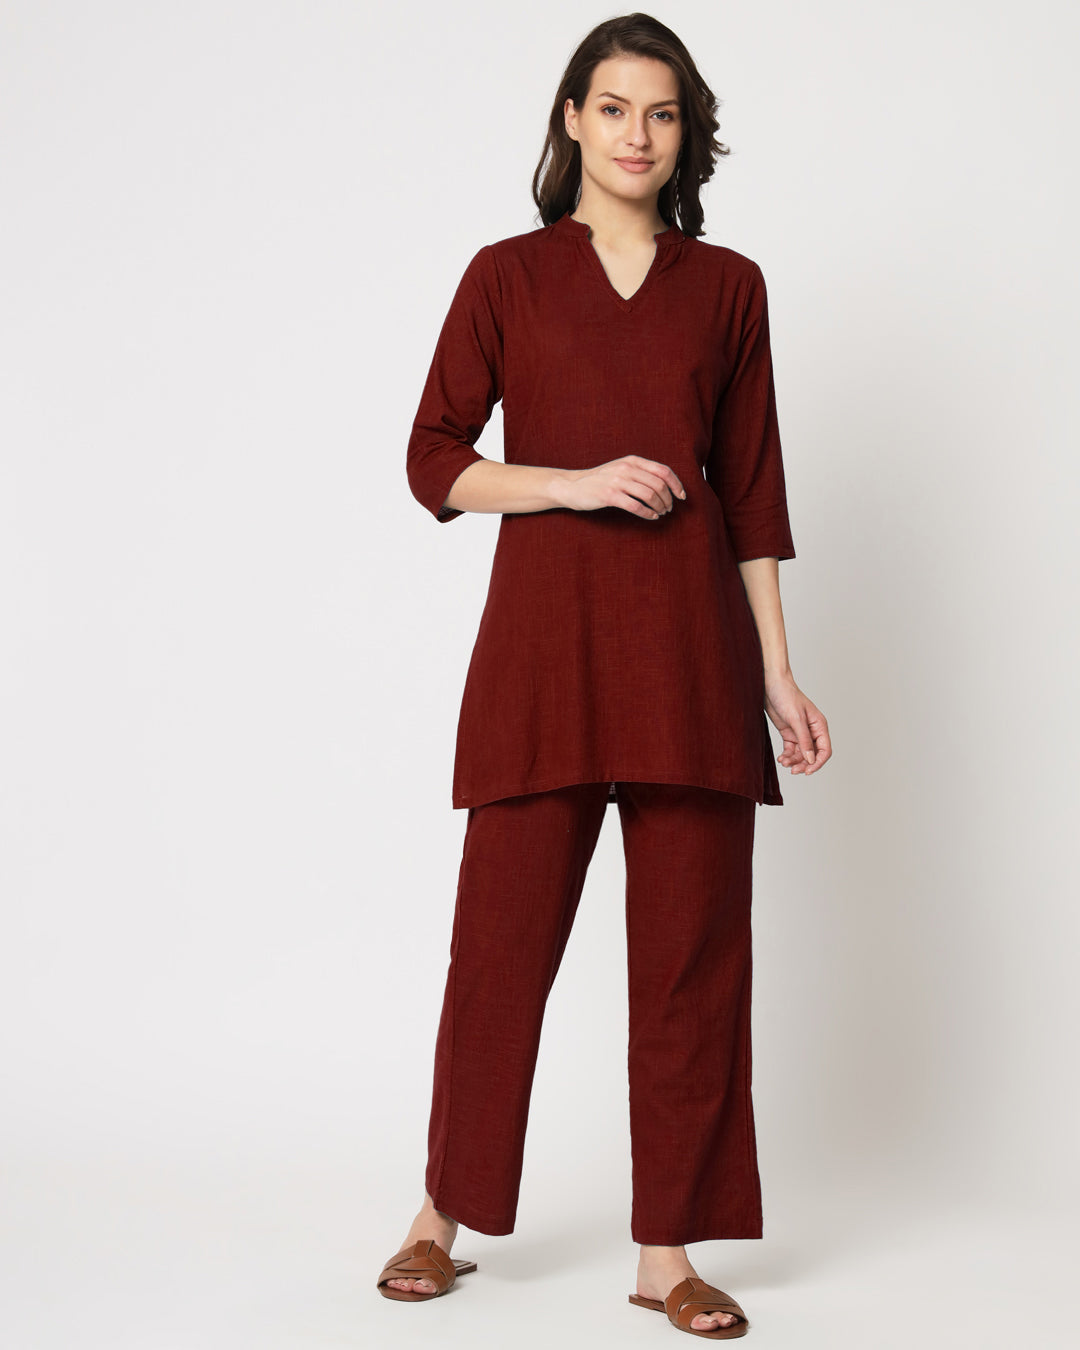 Russet Red Collar Neck Mid Length Solid Kurta (Without Bottoms)